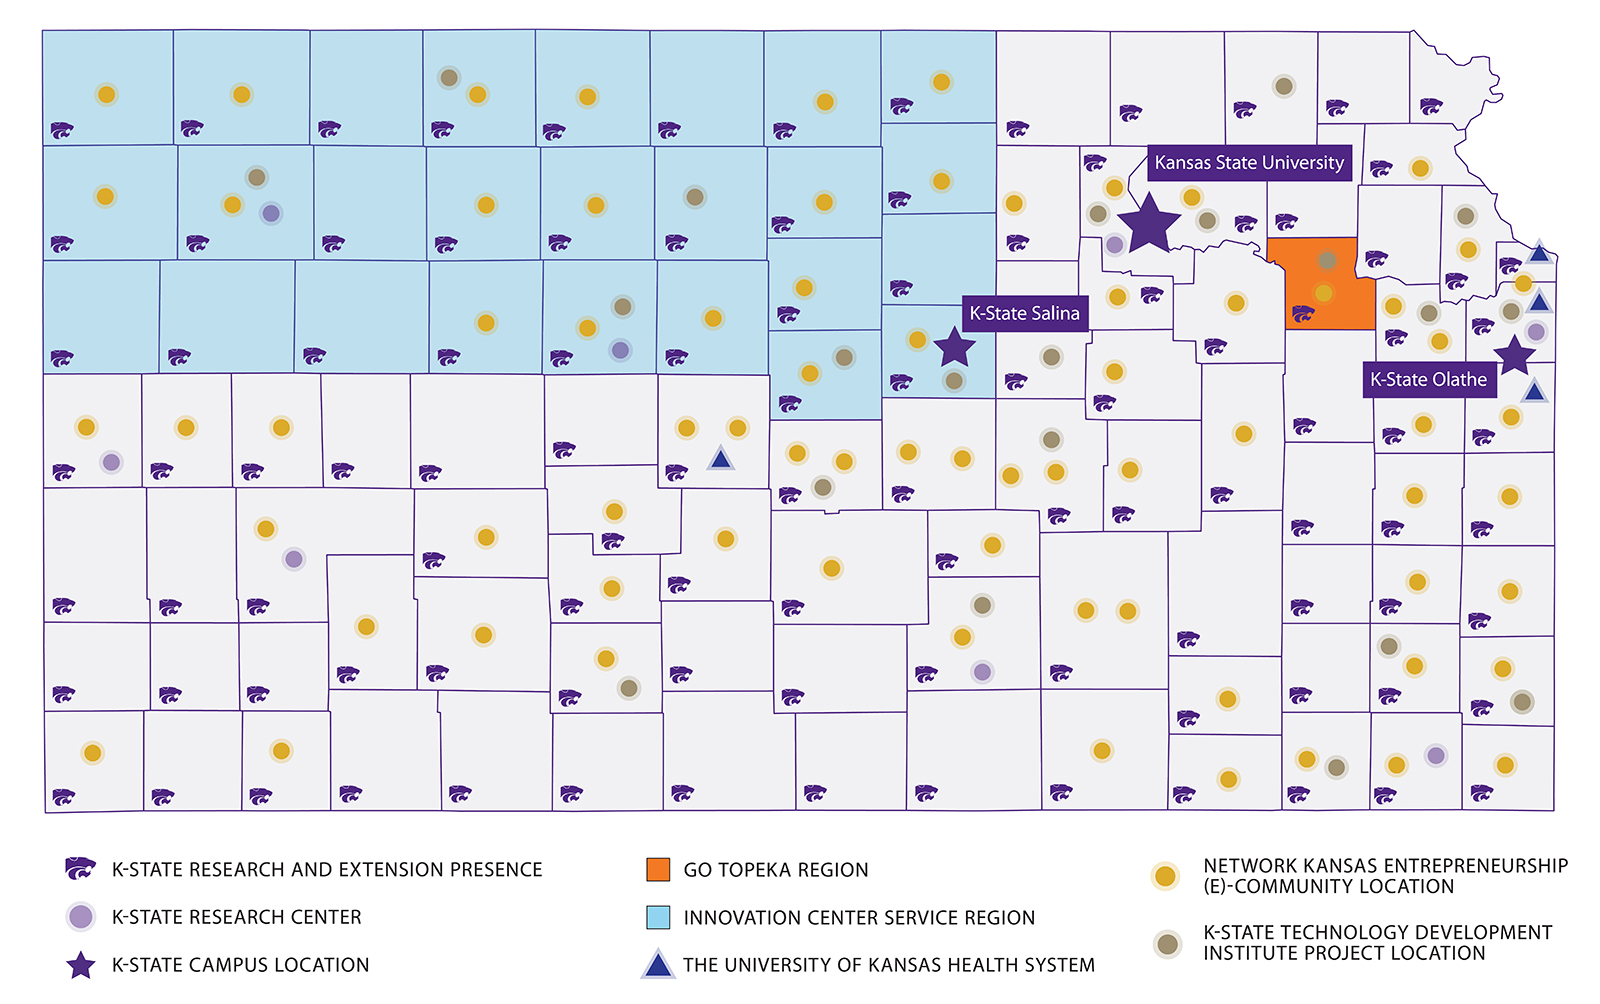 This map shows the presence of K-State 105 partners across the state.